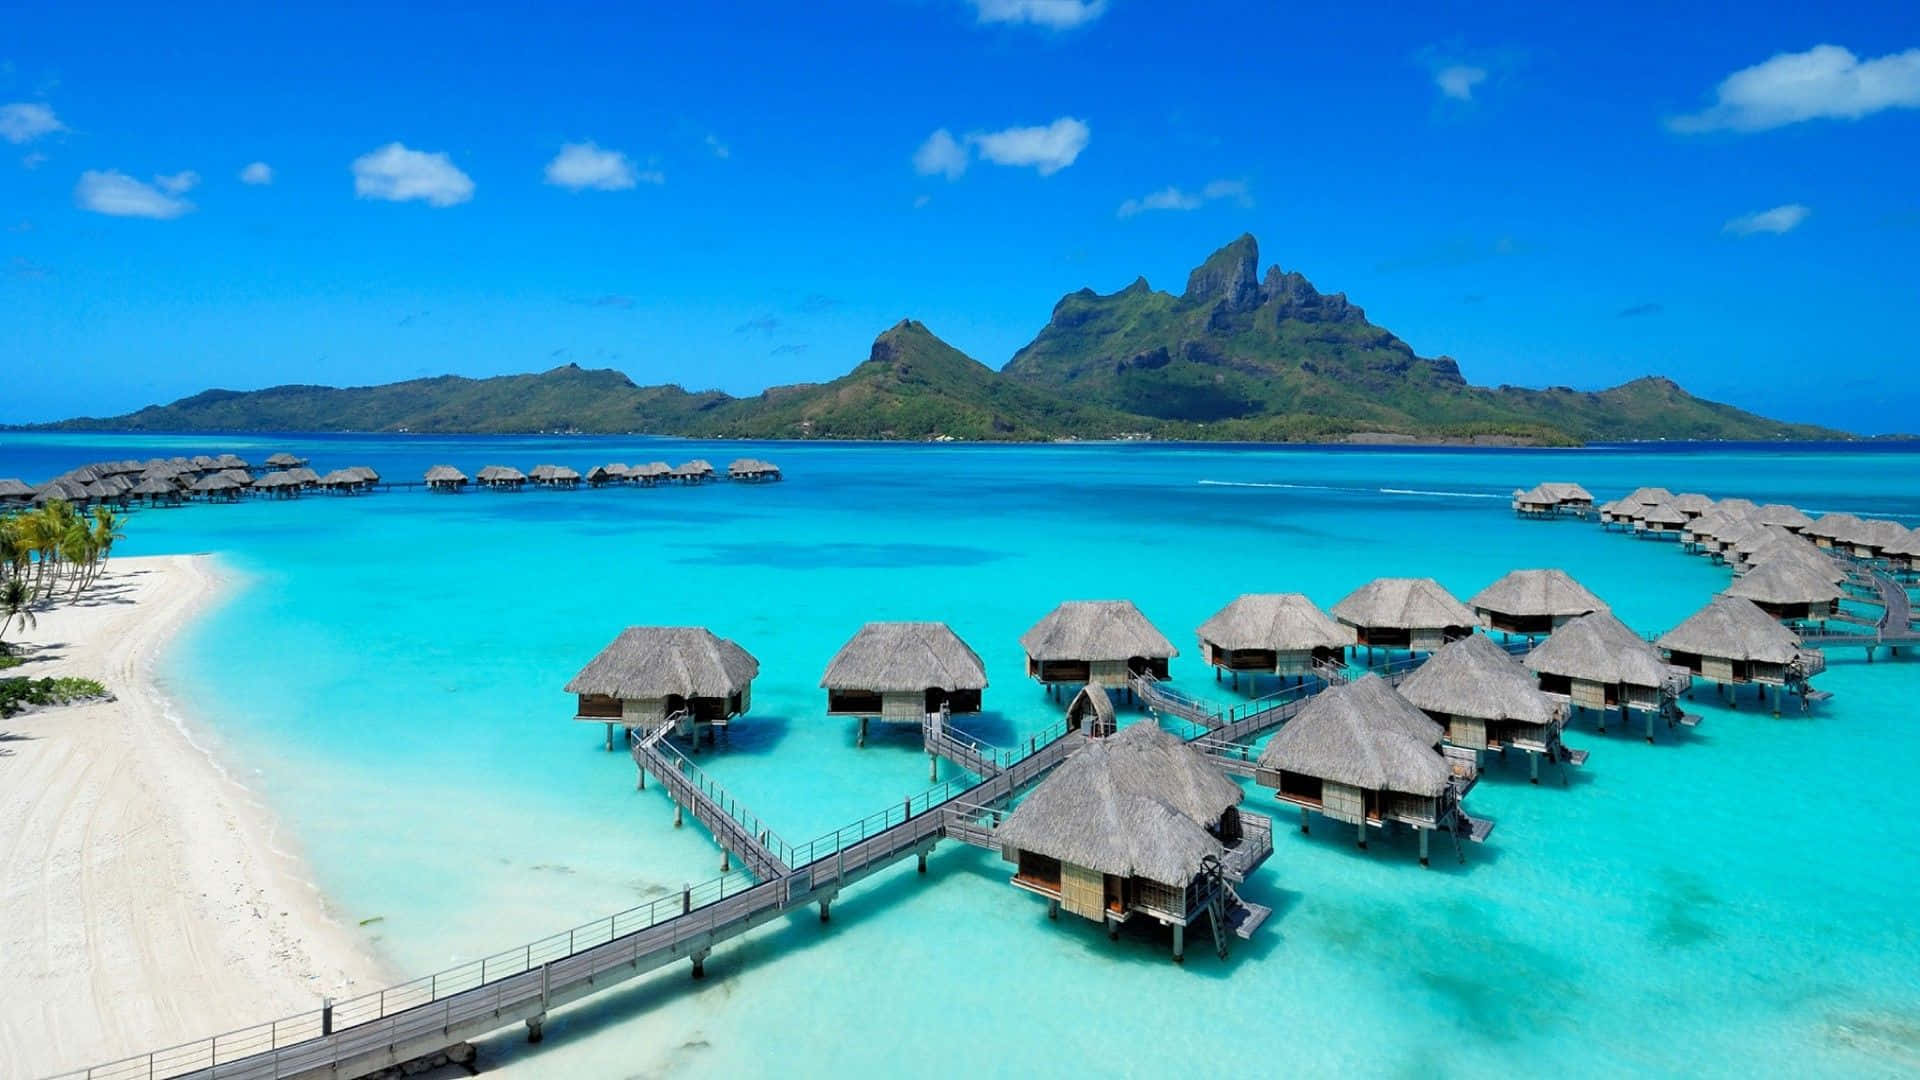 Relax and unwind in paradise - Wake up to perfect sunrises on the beach in Bora Bora. Wallpaper